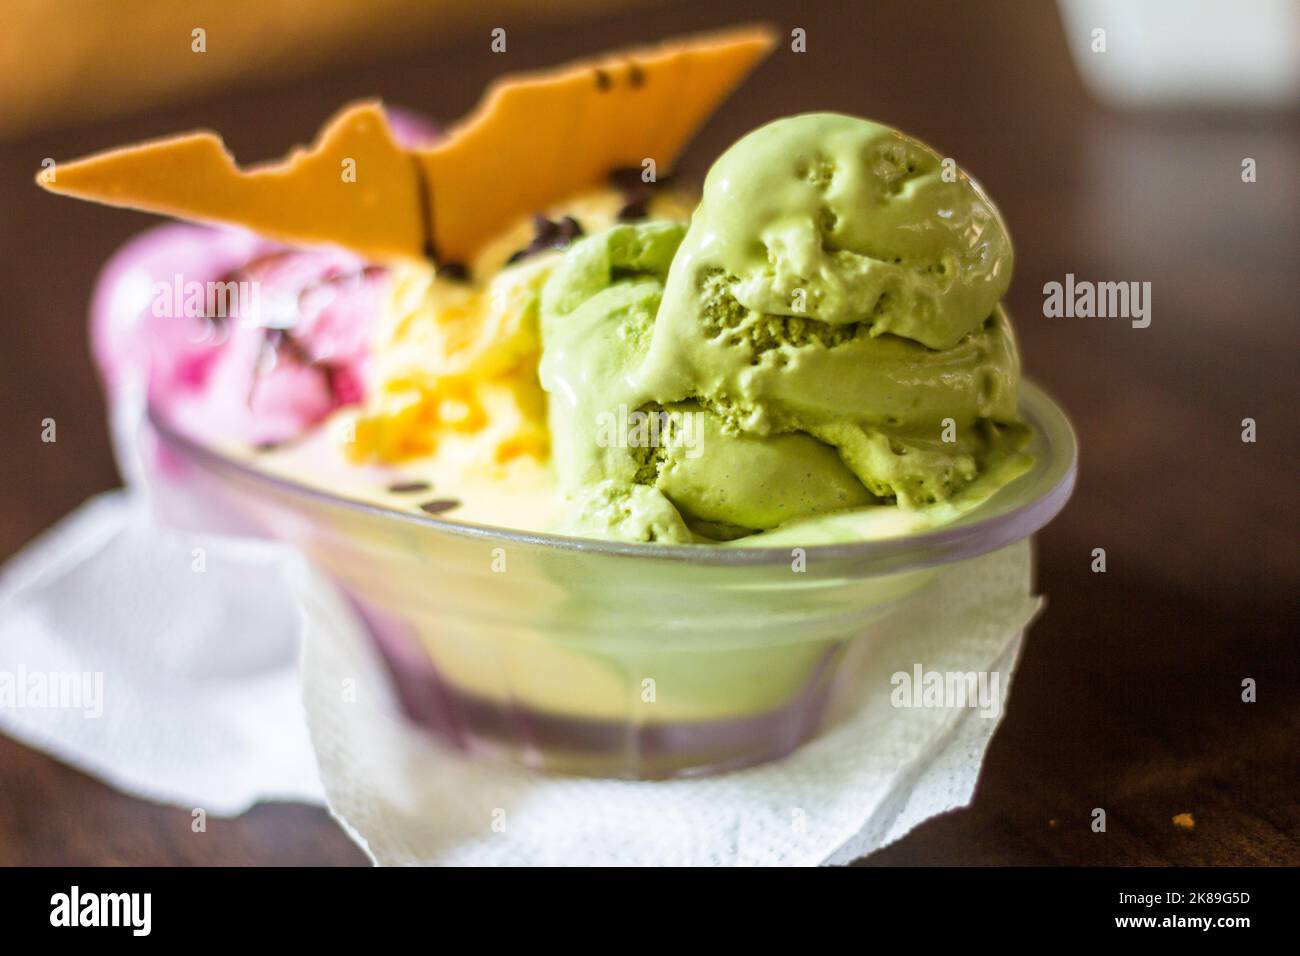 A dish of different fruit flavored ice cream at a cafe in Ilocos, Philippines Stock Photo